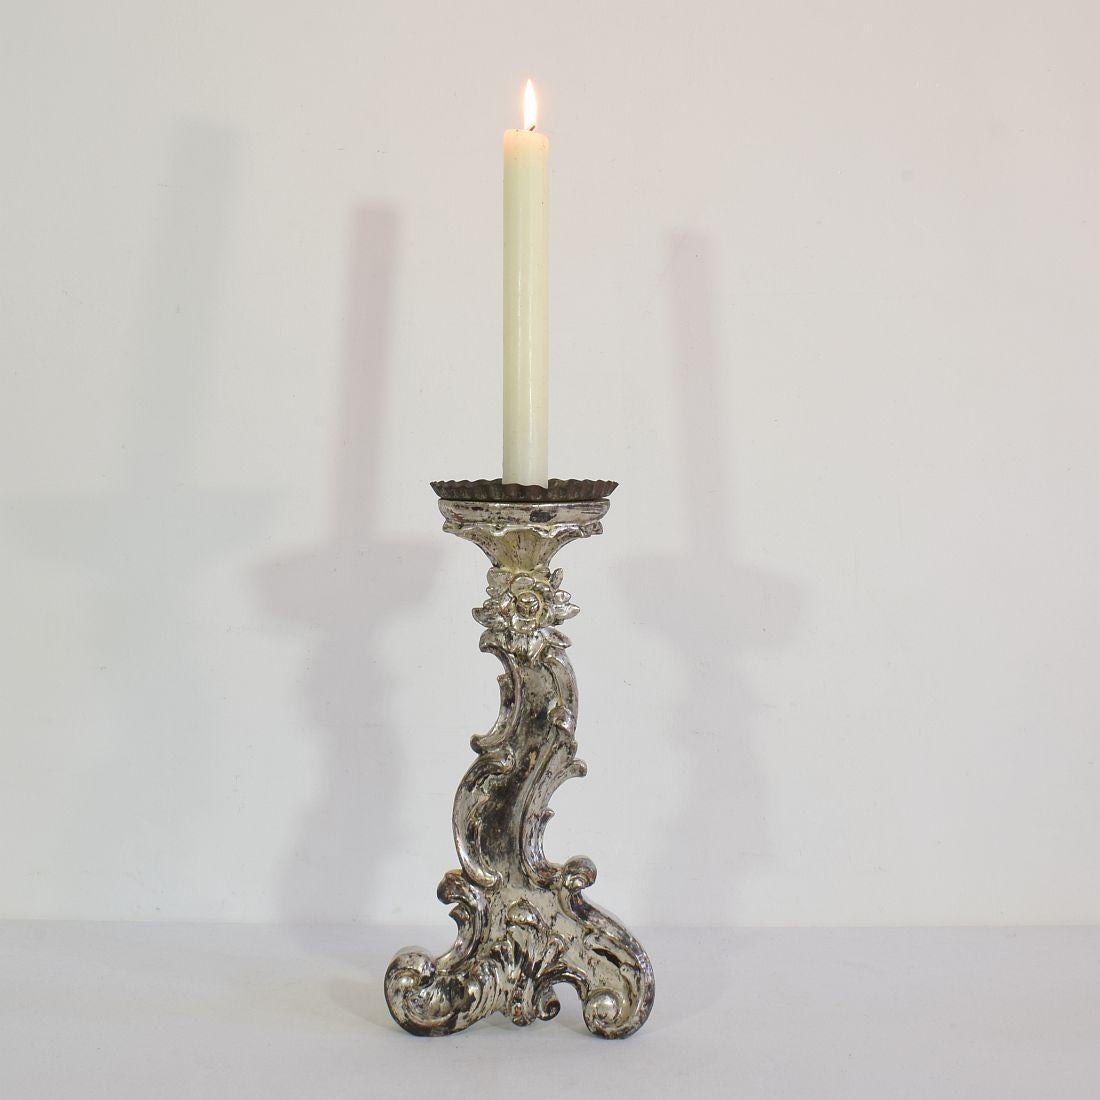 Great carved wooden candleholder with beautiful silver leaf,
Italy, circa 1750-1800.
Weathered and small losses.